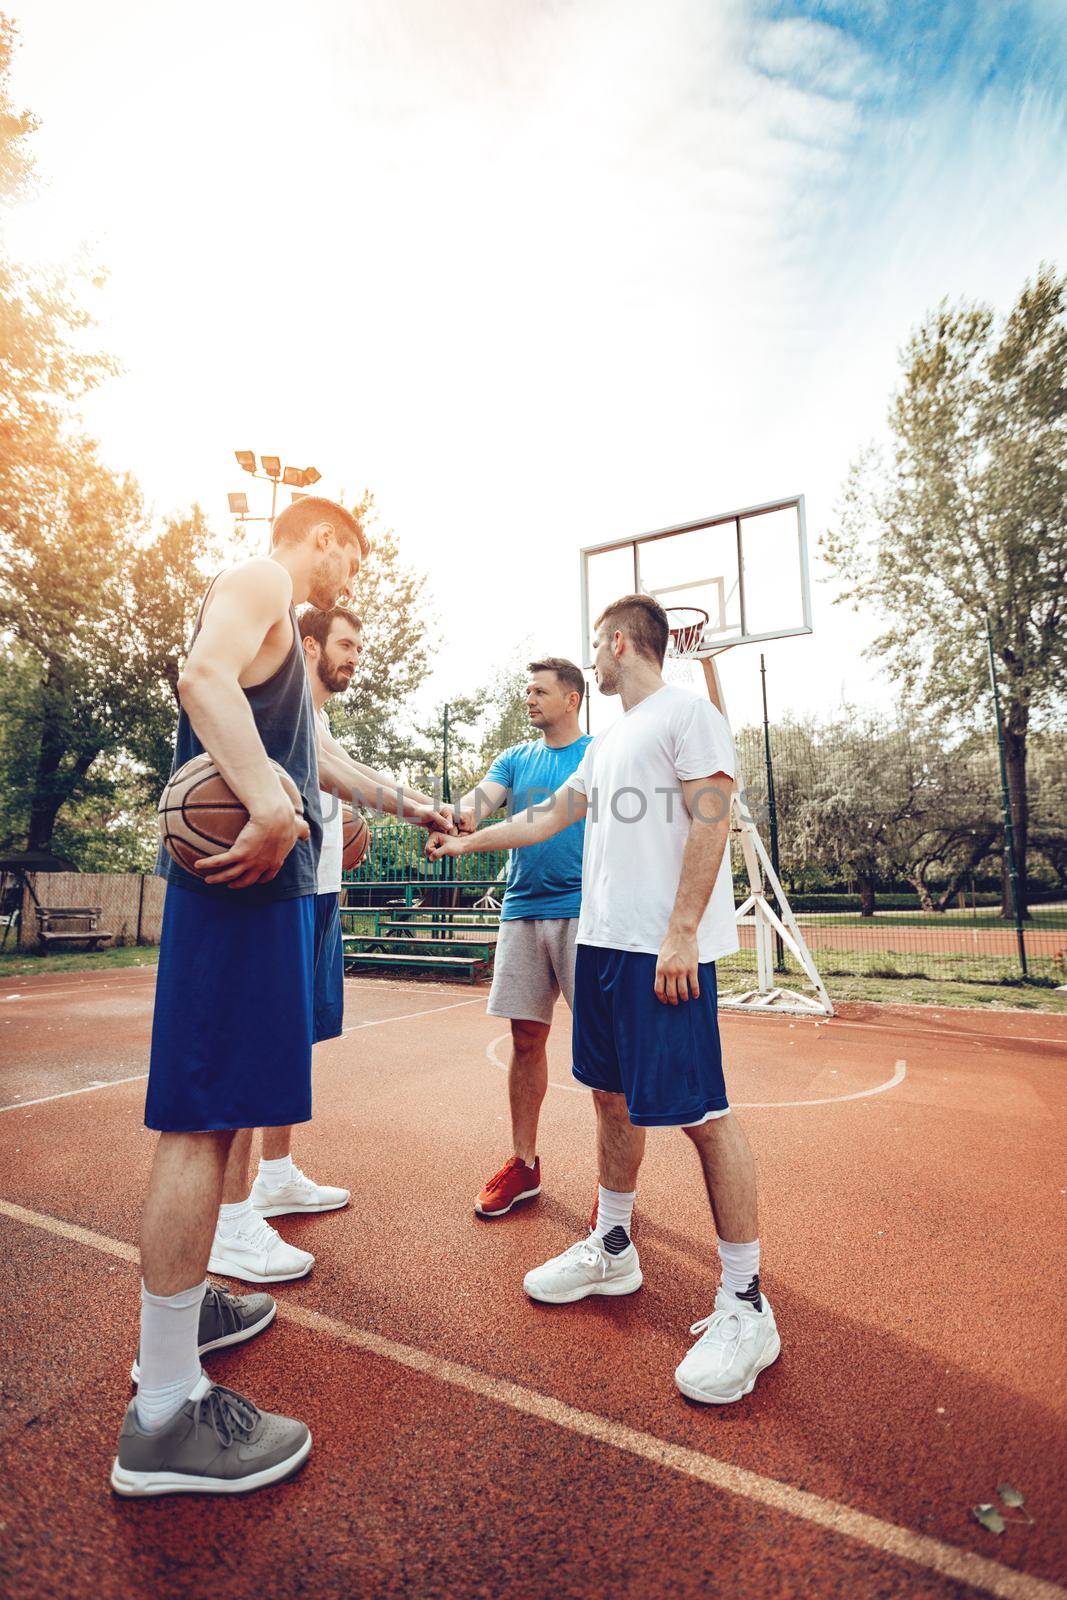 Four basketball players having a sports greeting before training. They hit their fists with smile on their face.